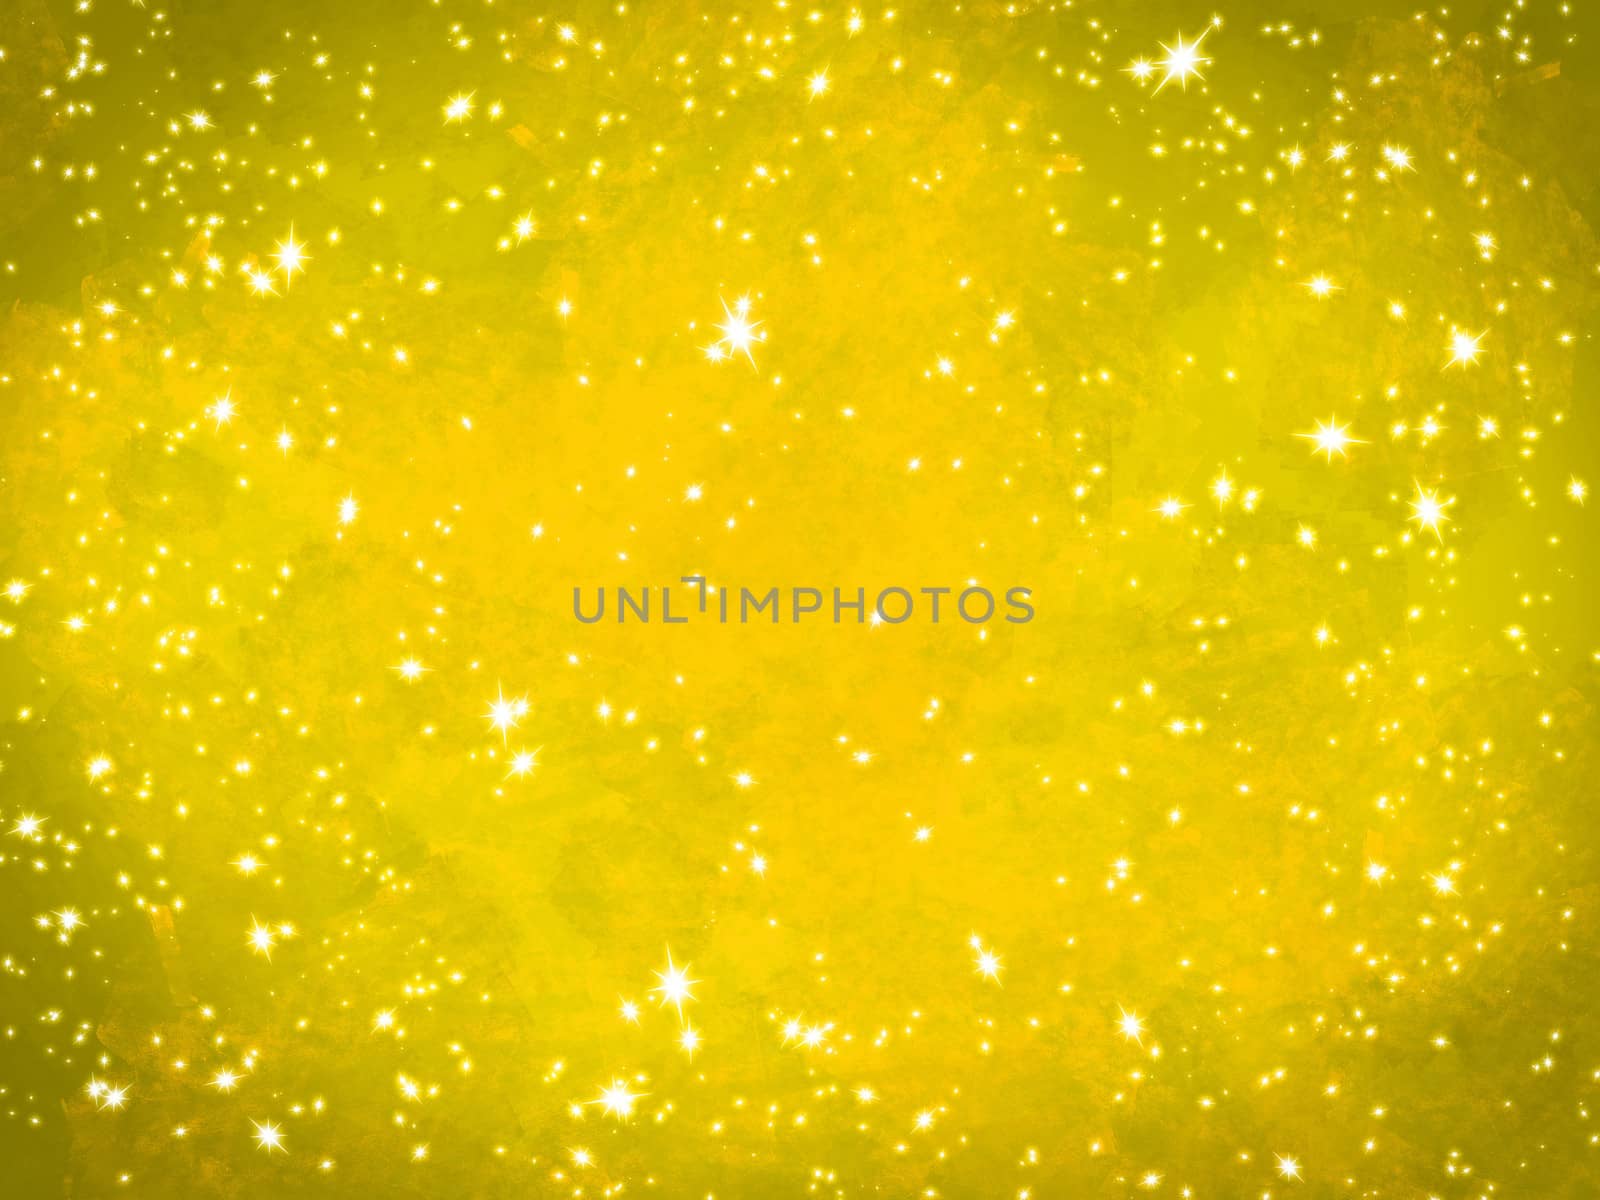 glittery yellow background on any festival